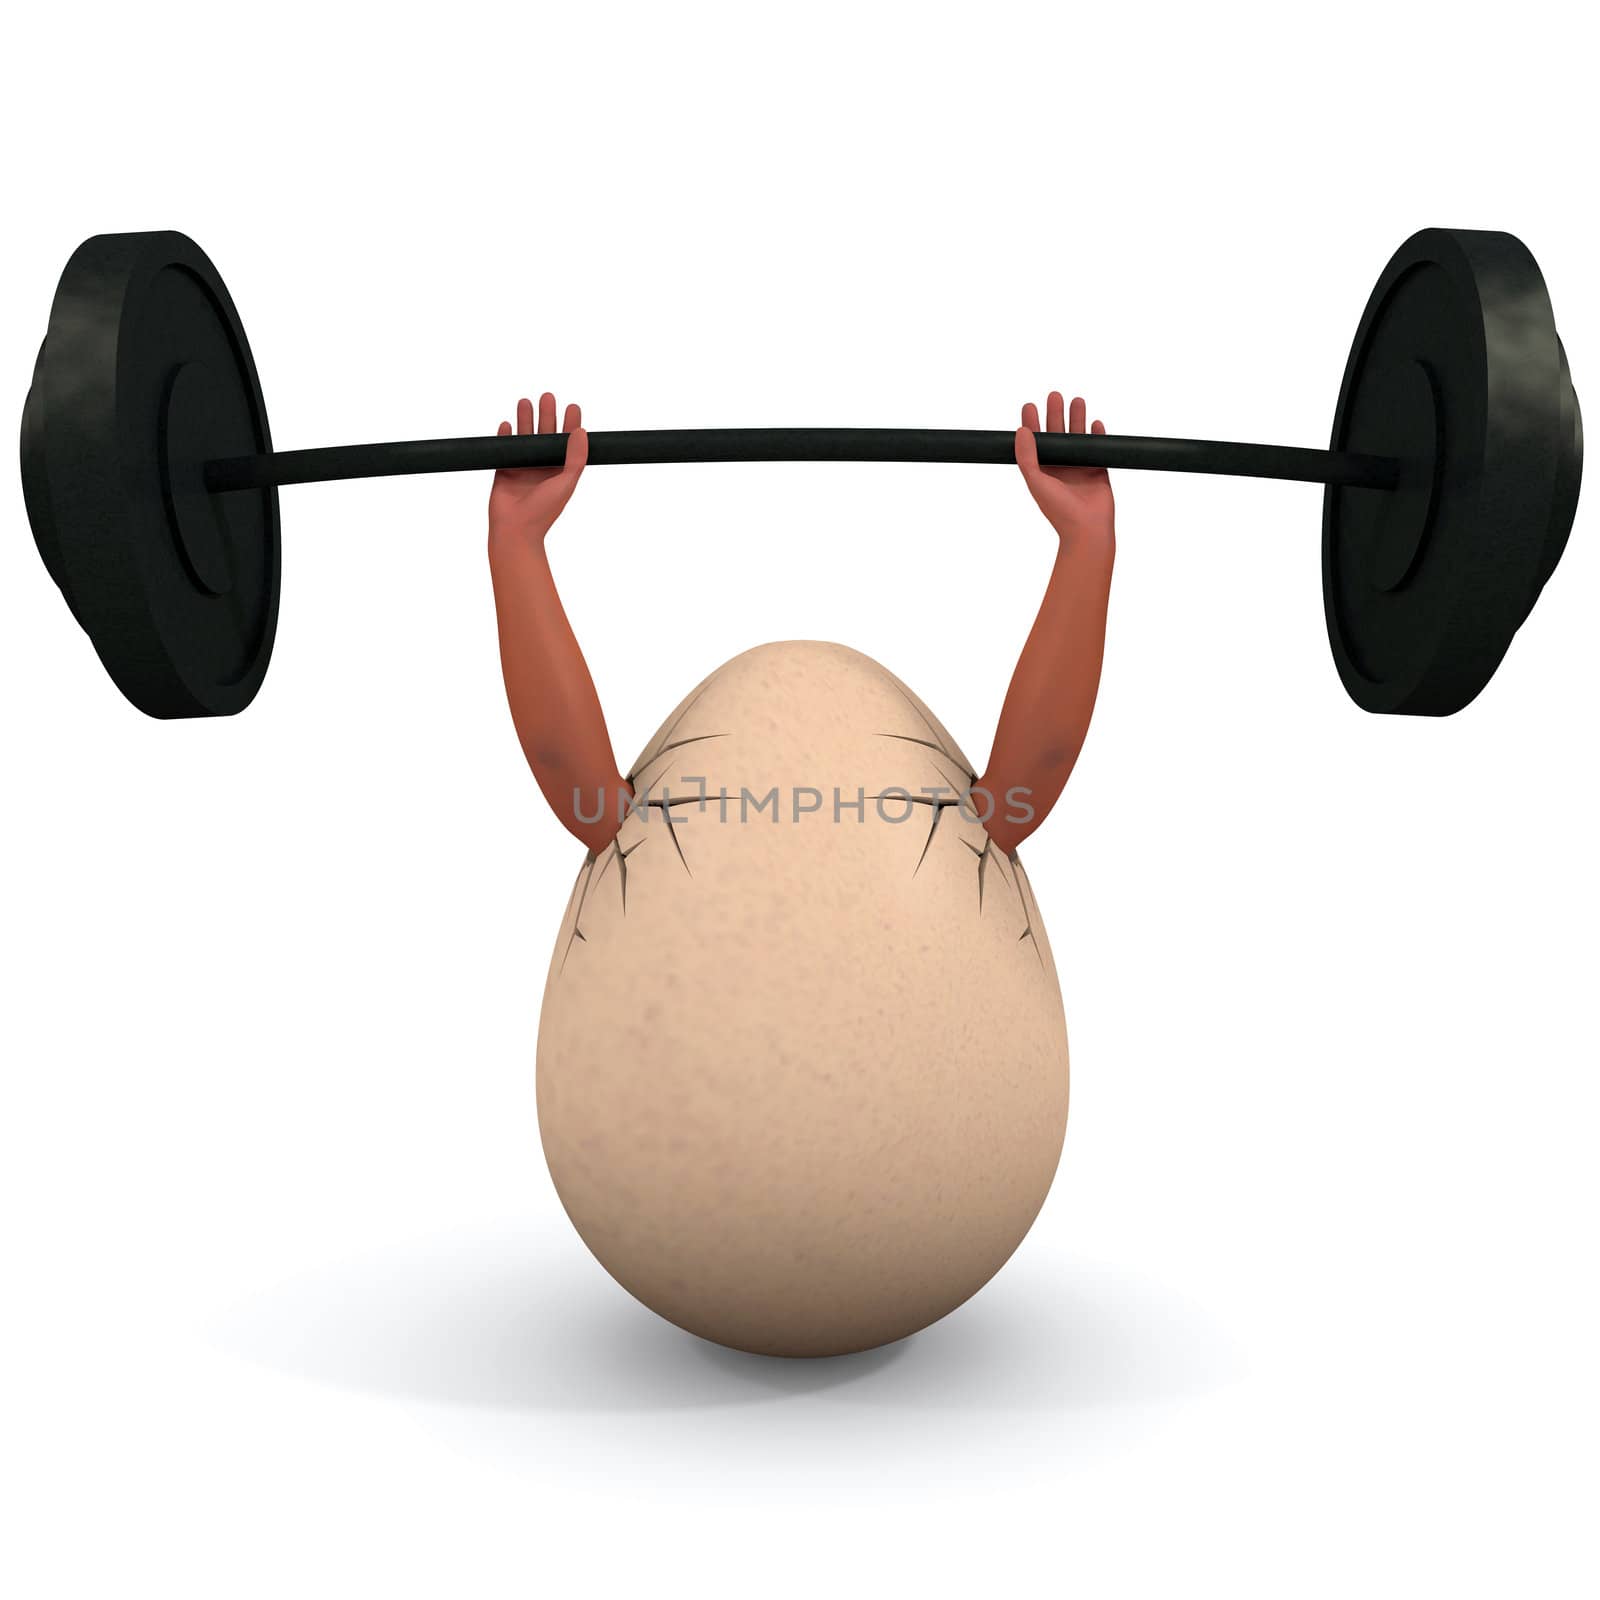 Egg holds a dumbbell. Illustration on body building and health subjects.